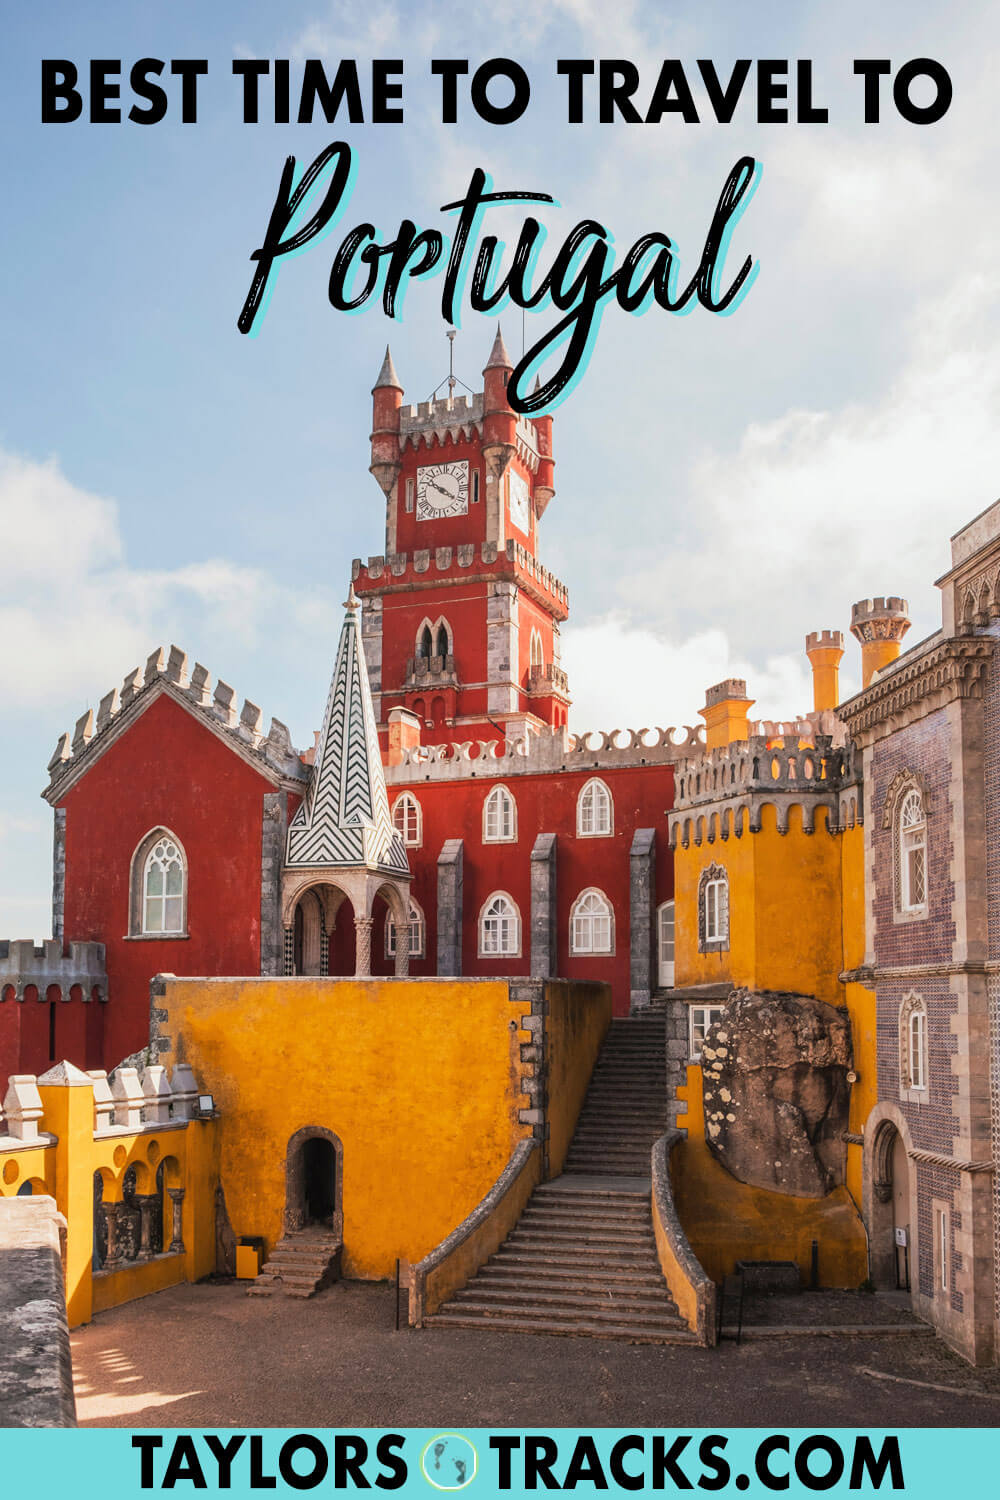 Best Time to Visit Portugal For Beaches, Sightseeing, Weather & More